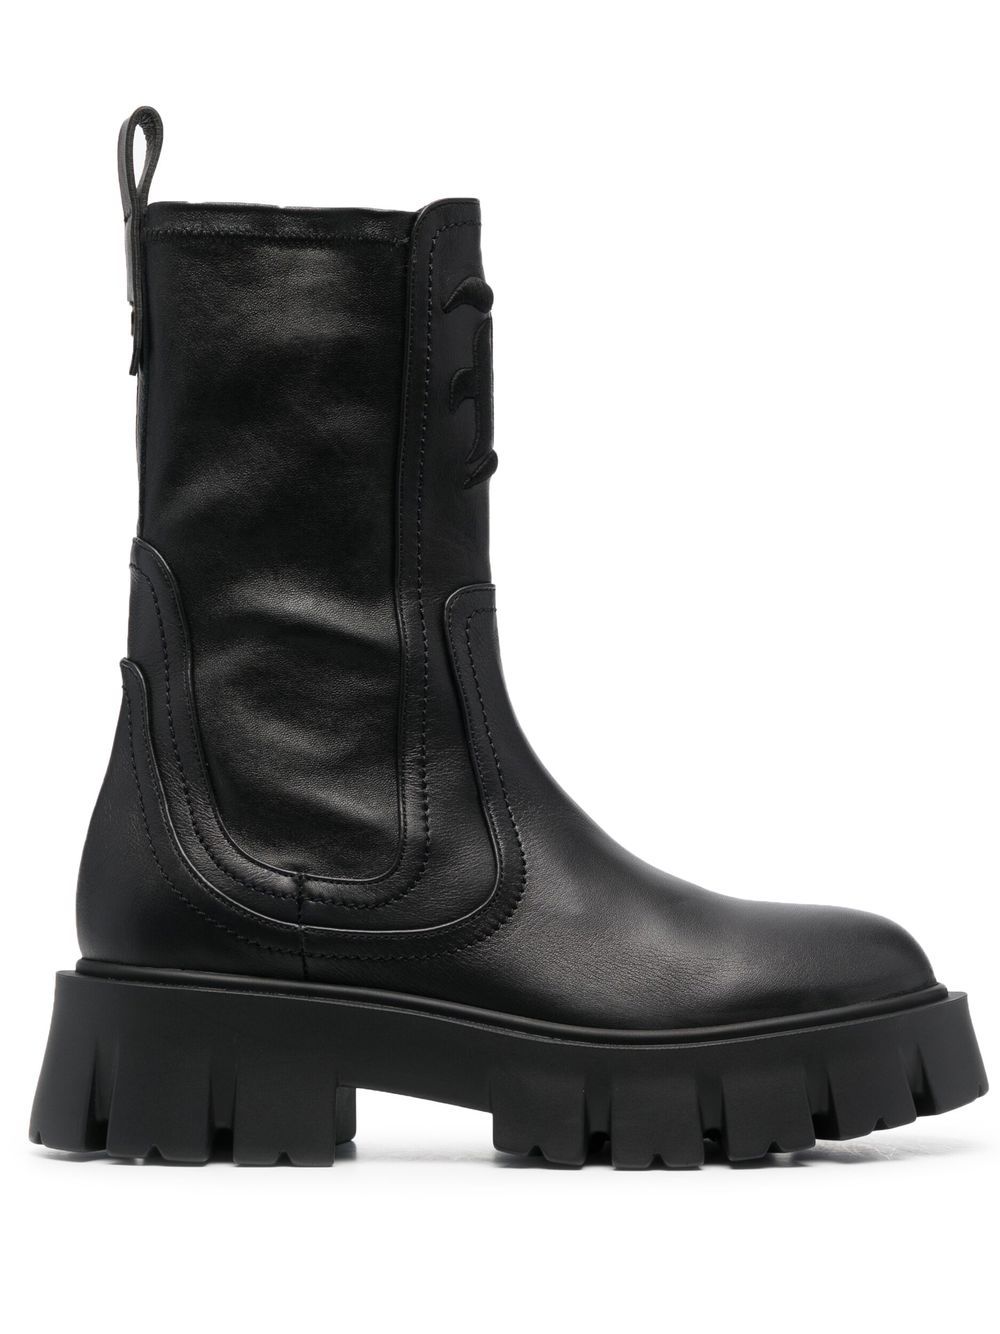 Ermanno Scervino zip-up Leather calf-length Boots - Farfetch